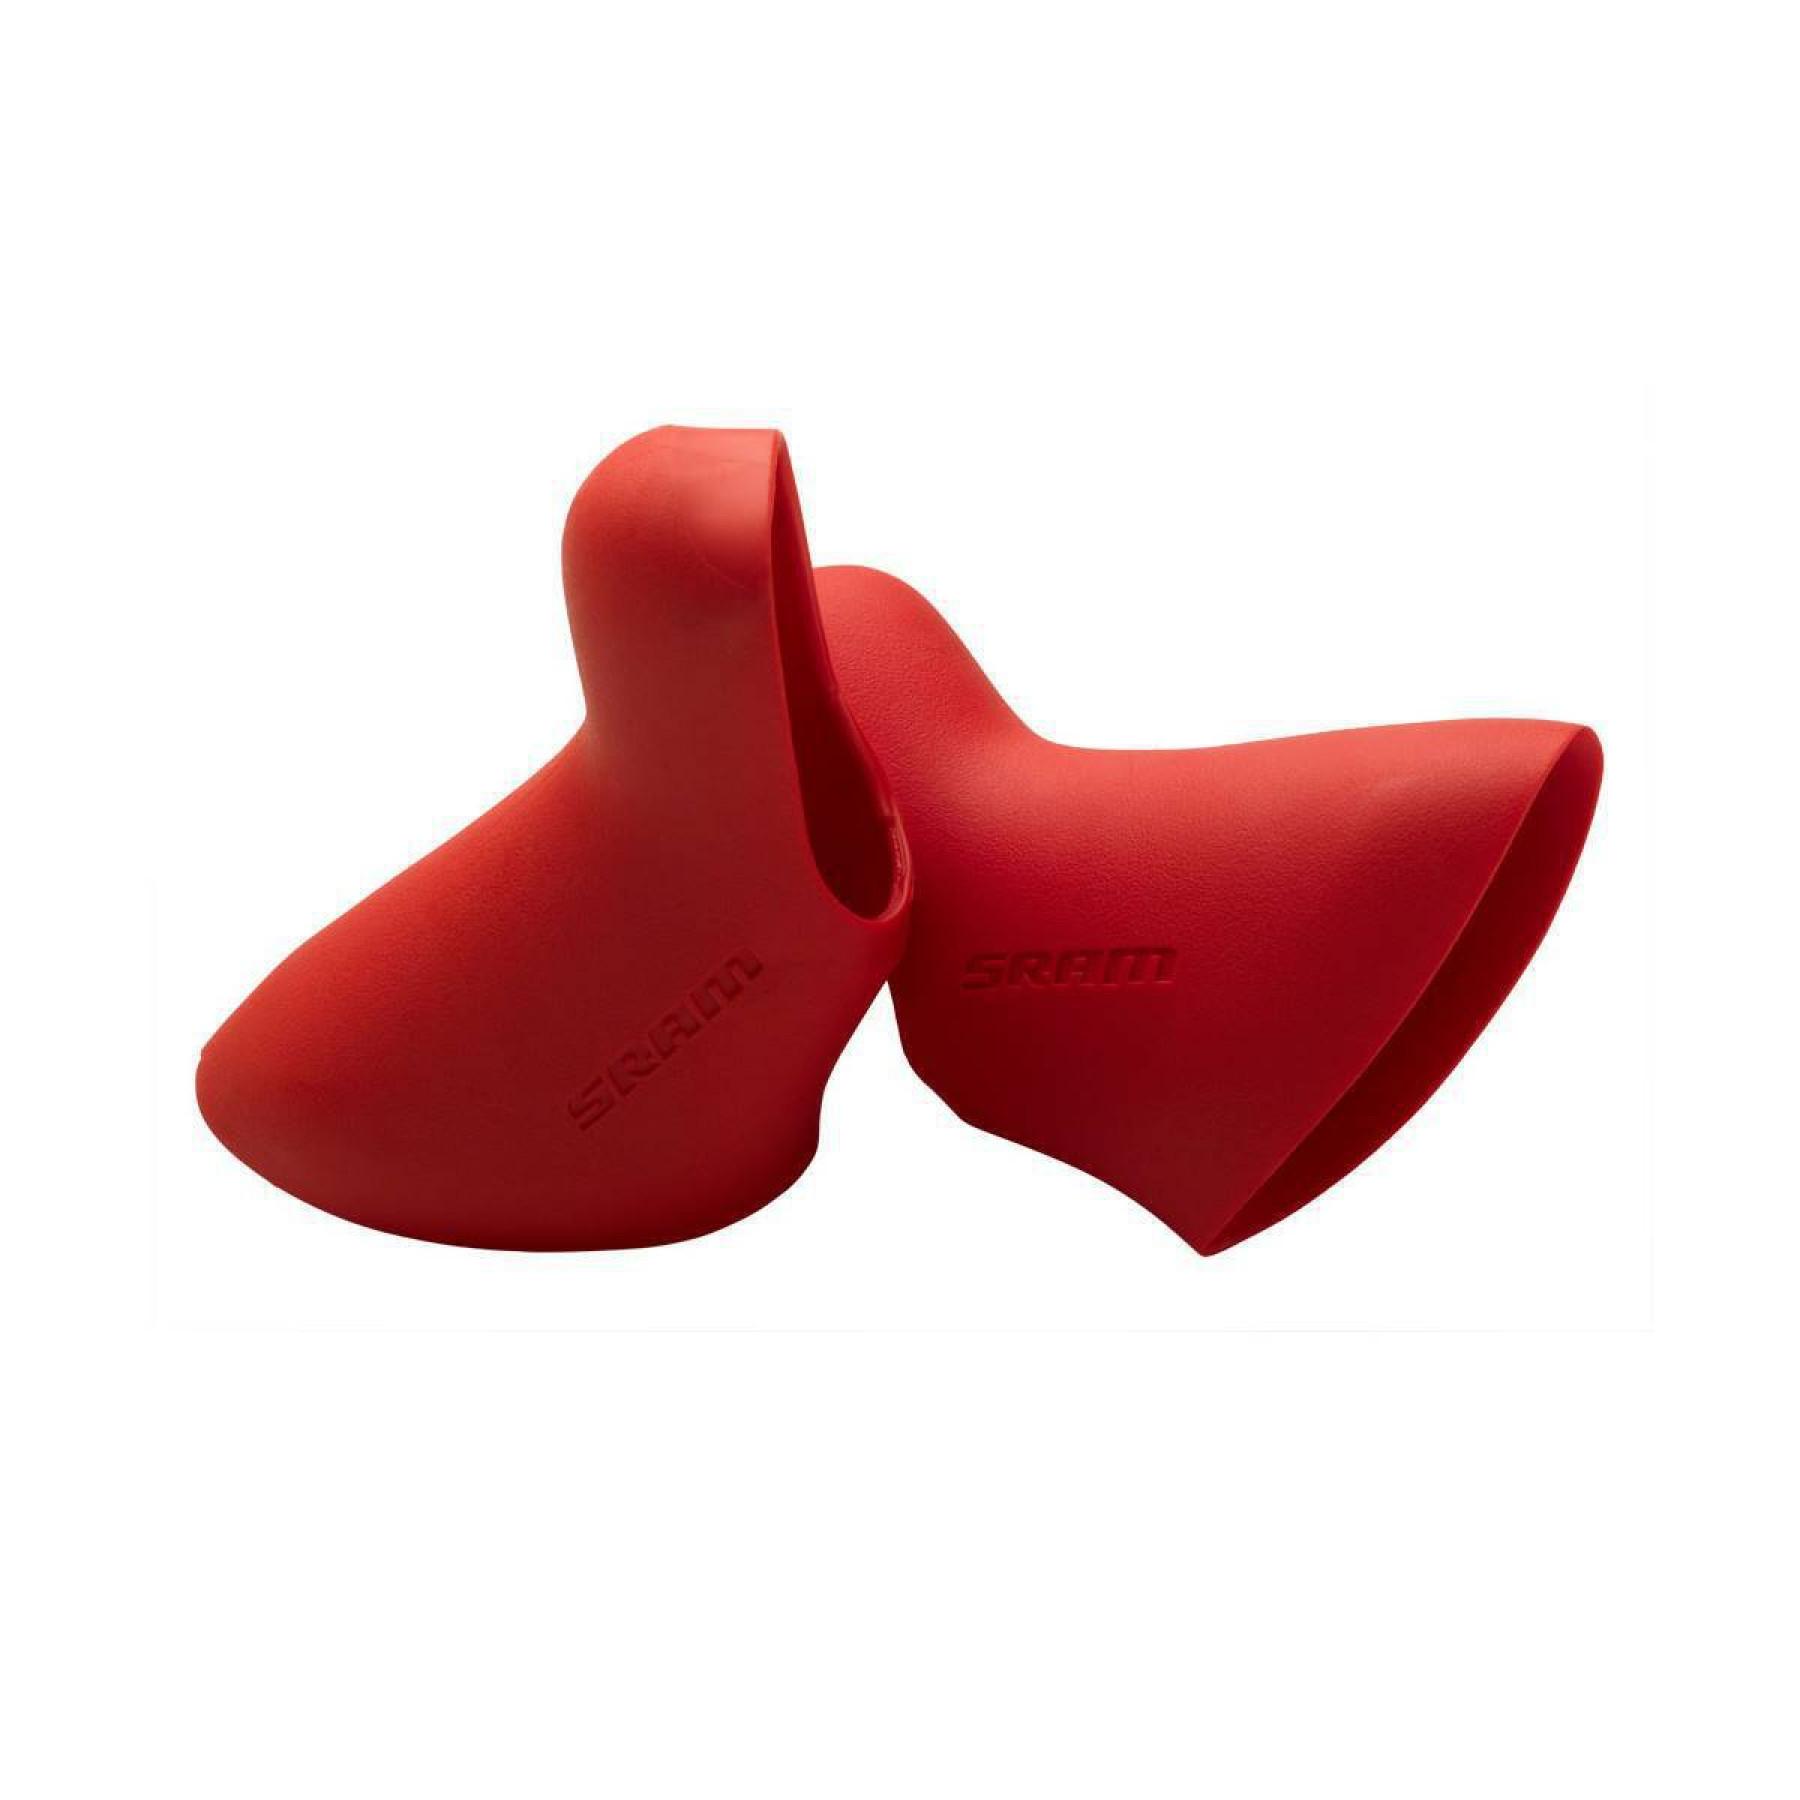 Joystick Sram Cocottes Red Force Rival 22